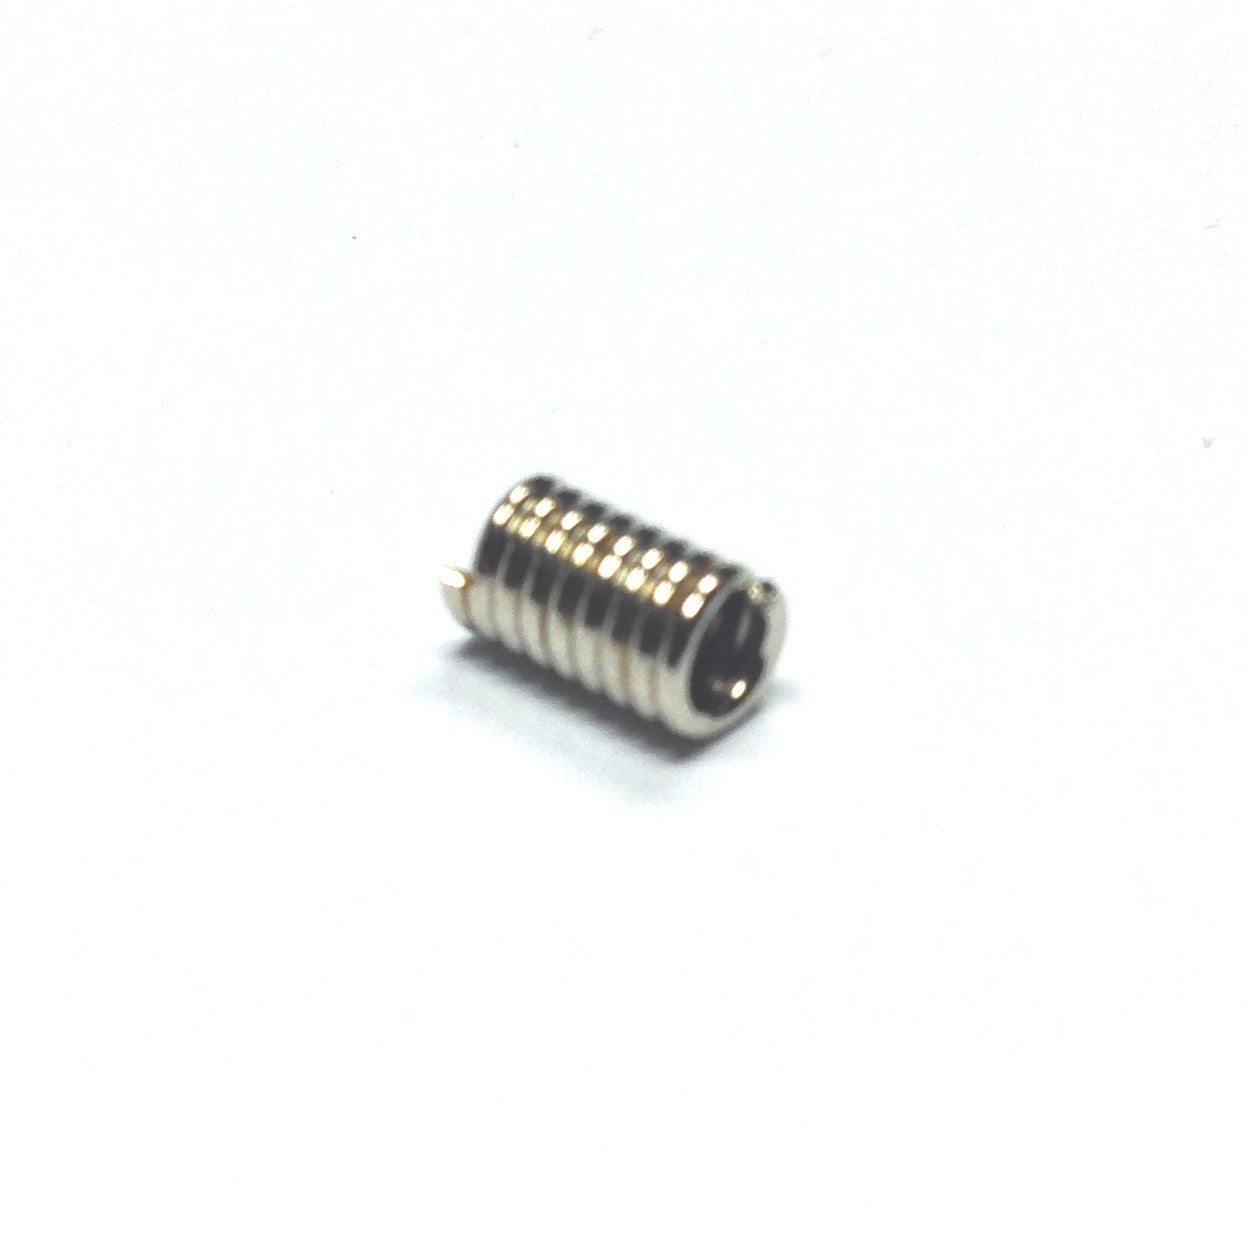 6X4MM Nickel Spring With 2MM Opening (144 pieces)